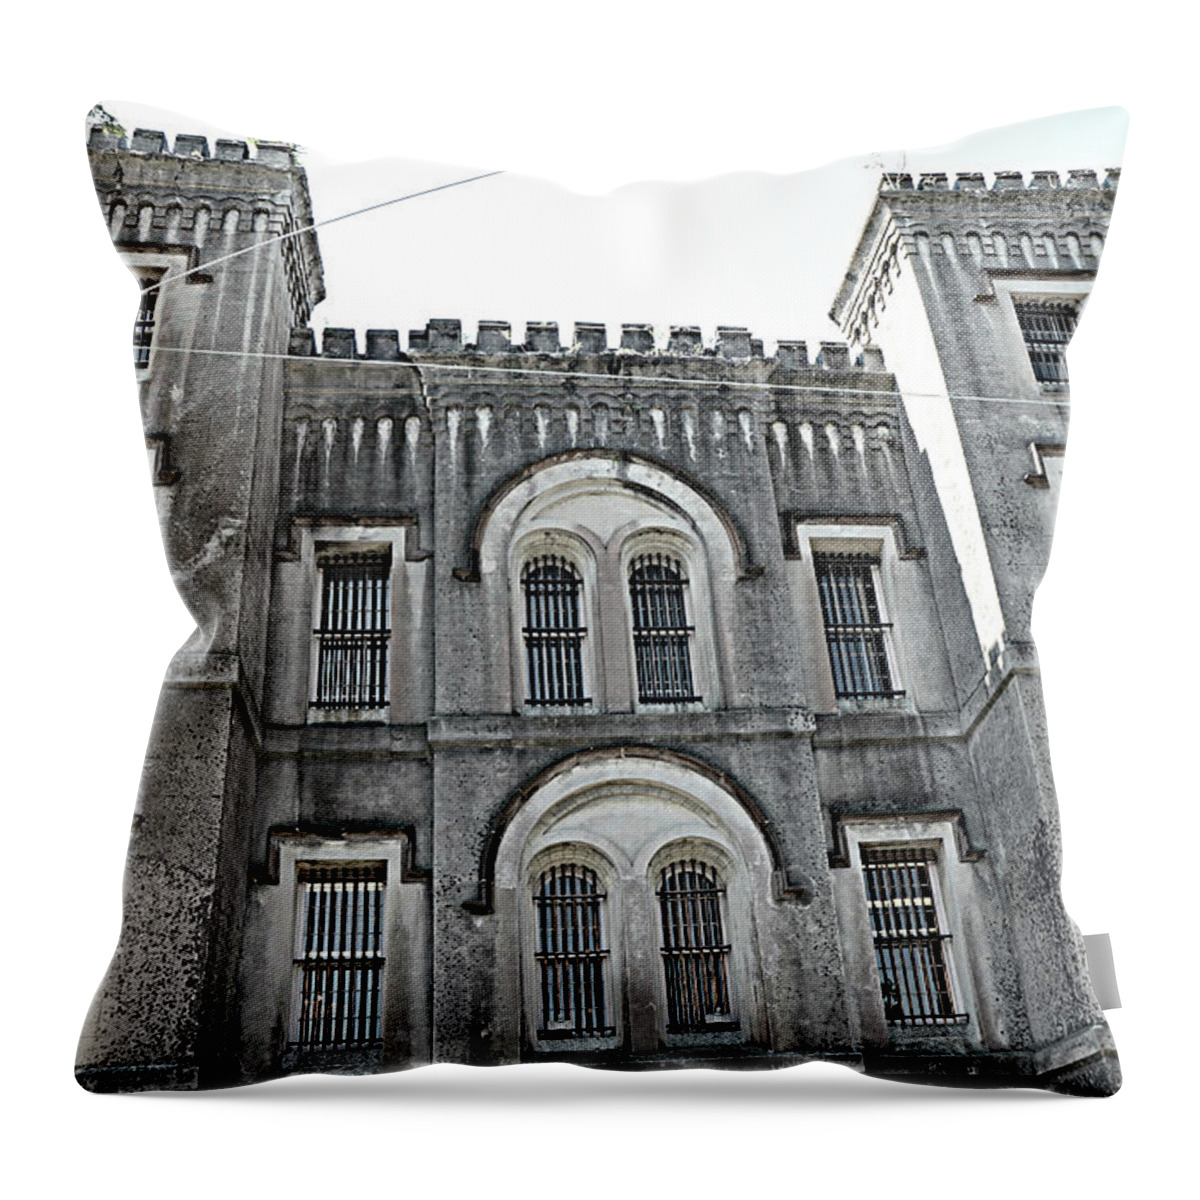 Charleston Historical Monuments Throw Pillow featuring the photograph Charleston Historical Haunted Old Jail House - Charleston Old Jail Civil War Architecture by Kathy Fornal